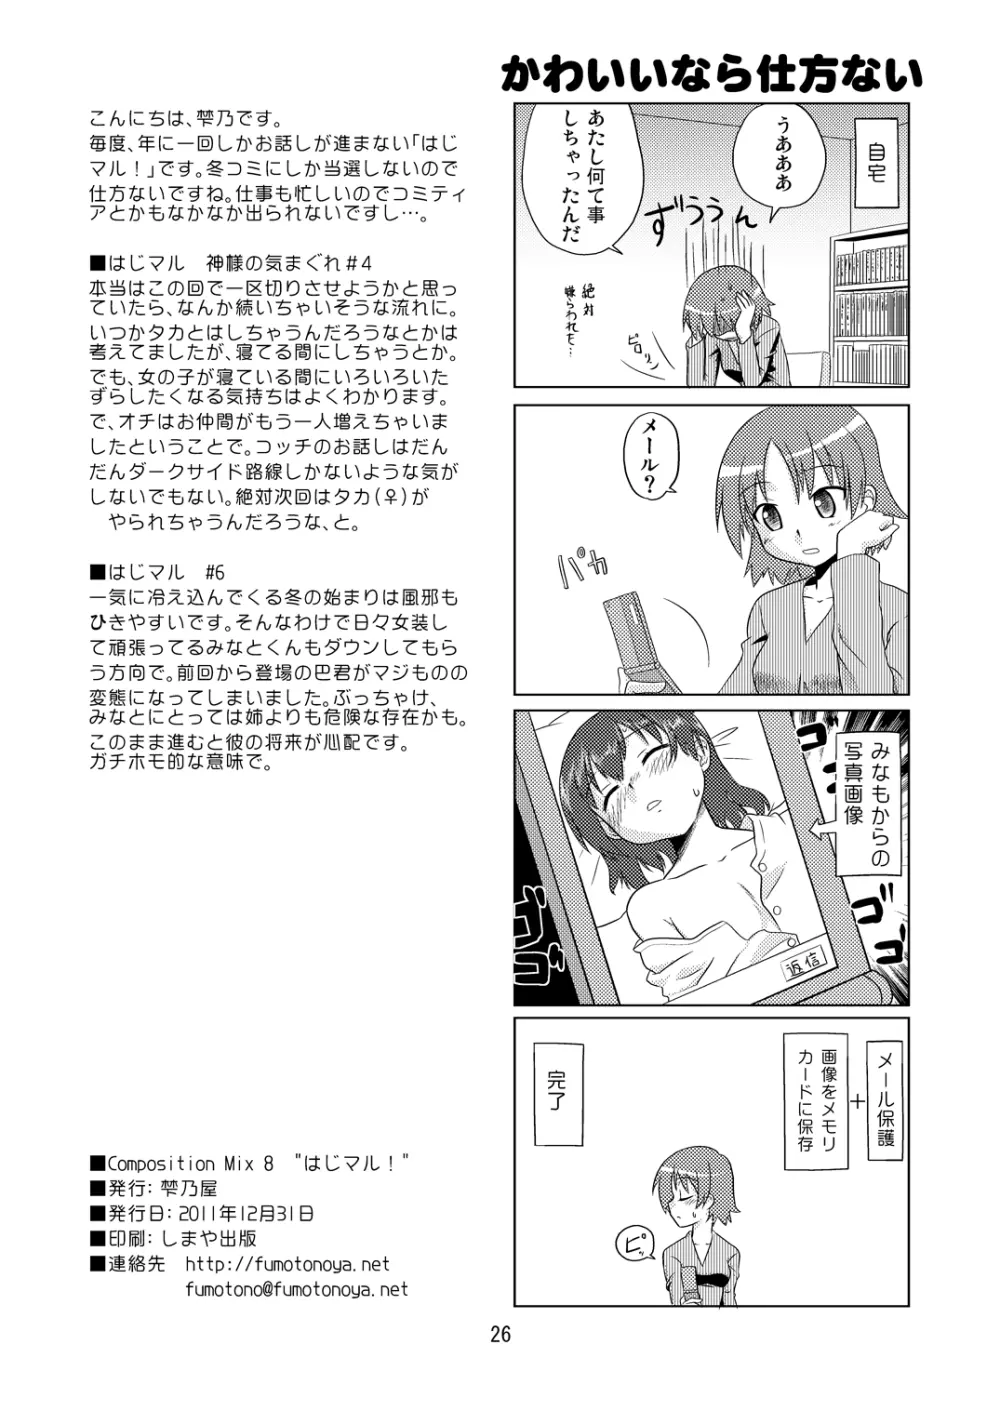 Composition Mix 8 はじマル！6 - page25